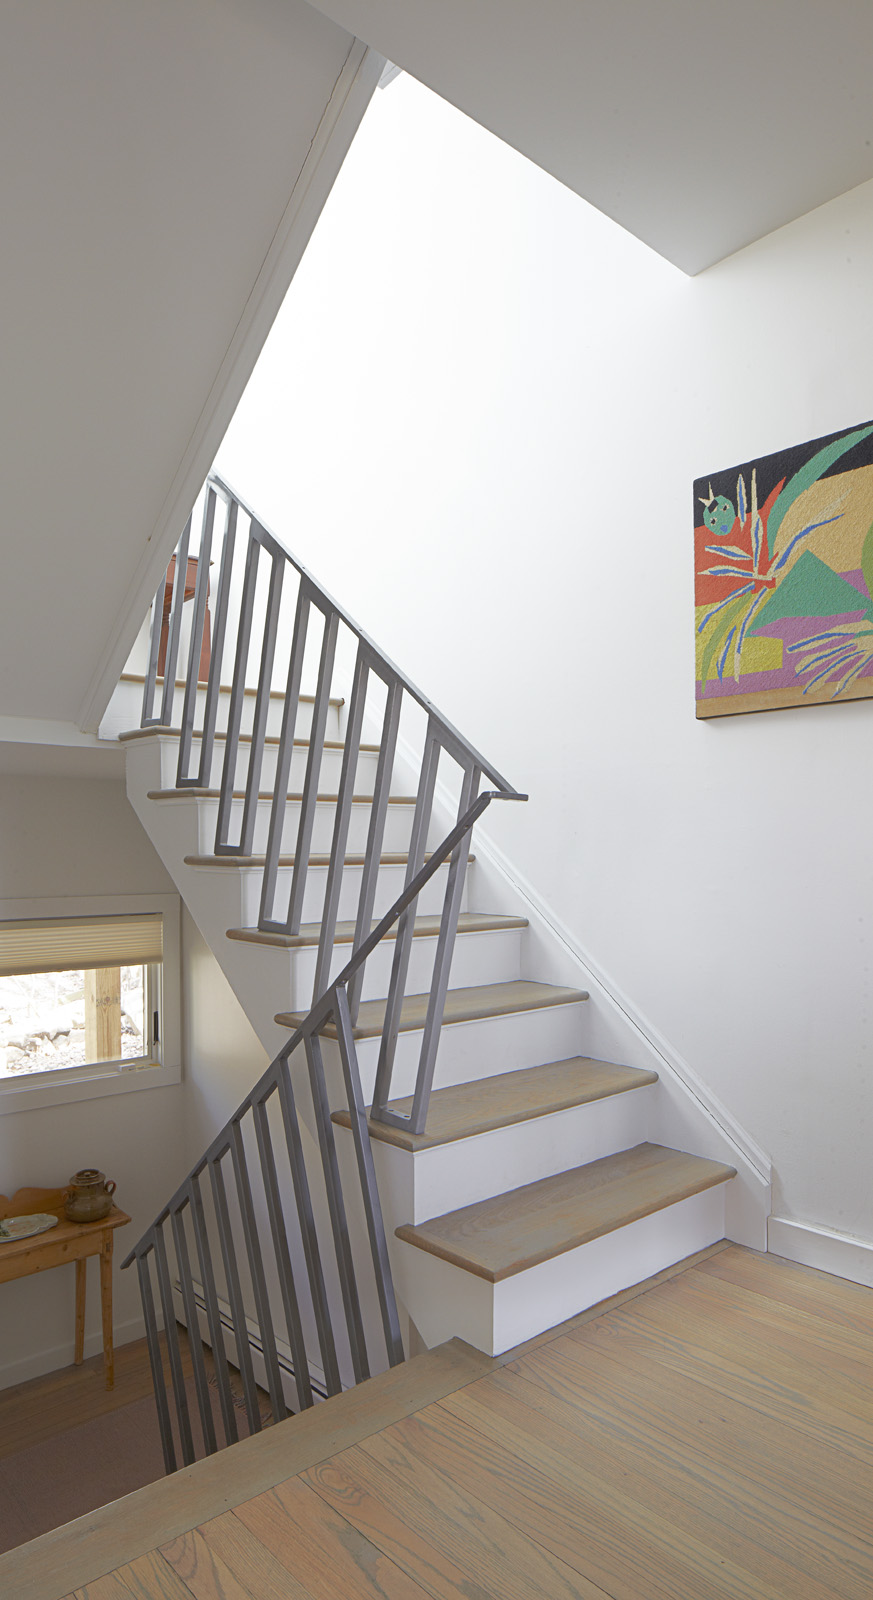 A custom designed handrail connects the old stairs with the new.